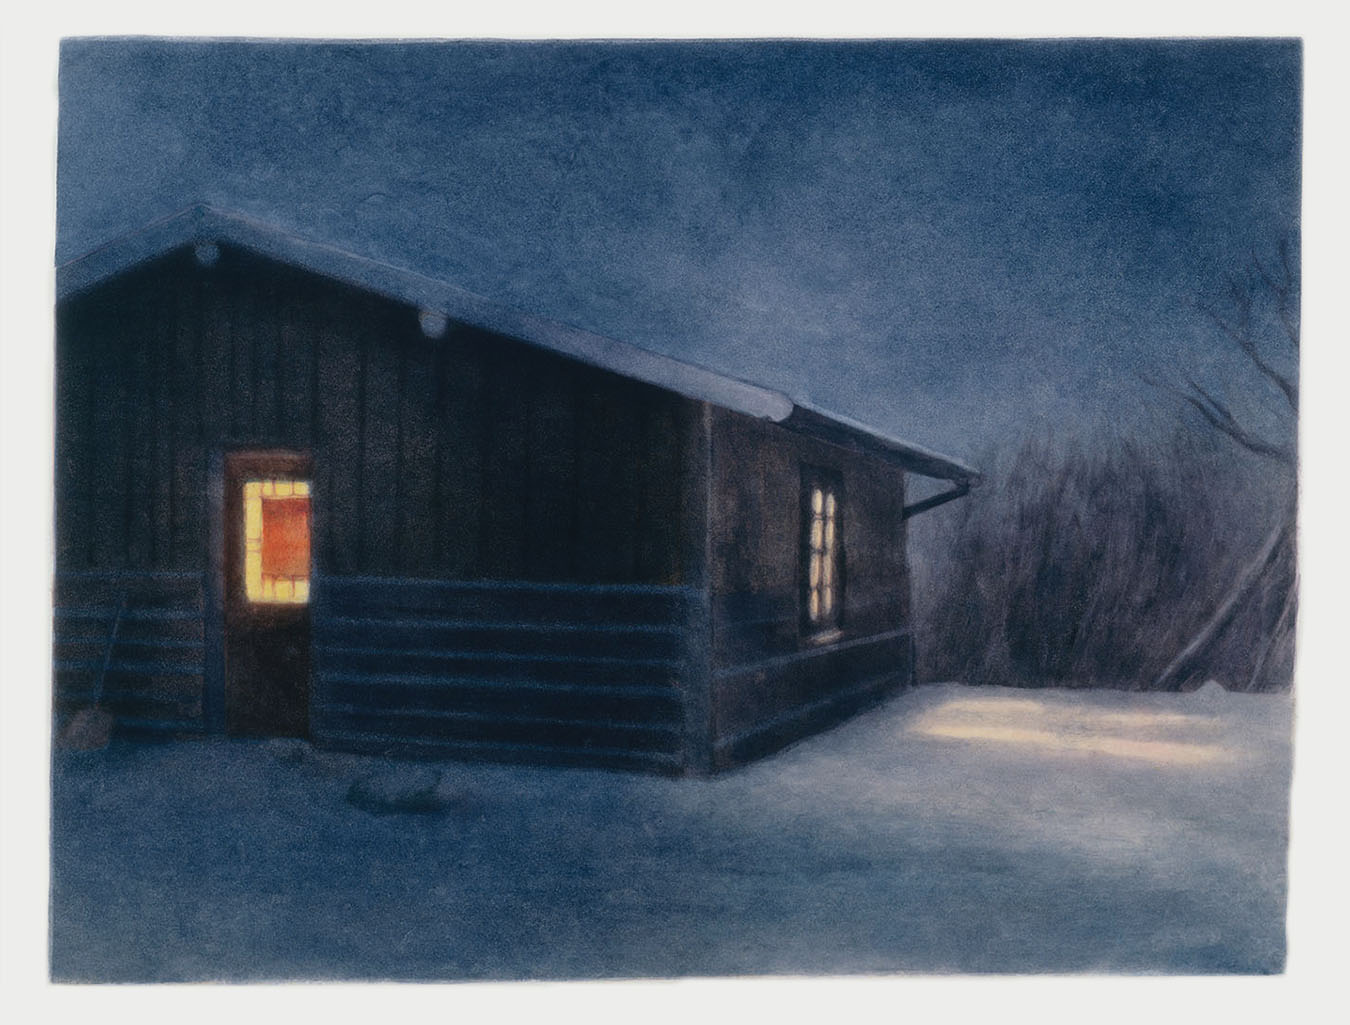   Cold Night Wyoming  2003 monotype 18 x 25 in. 